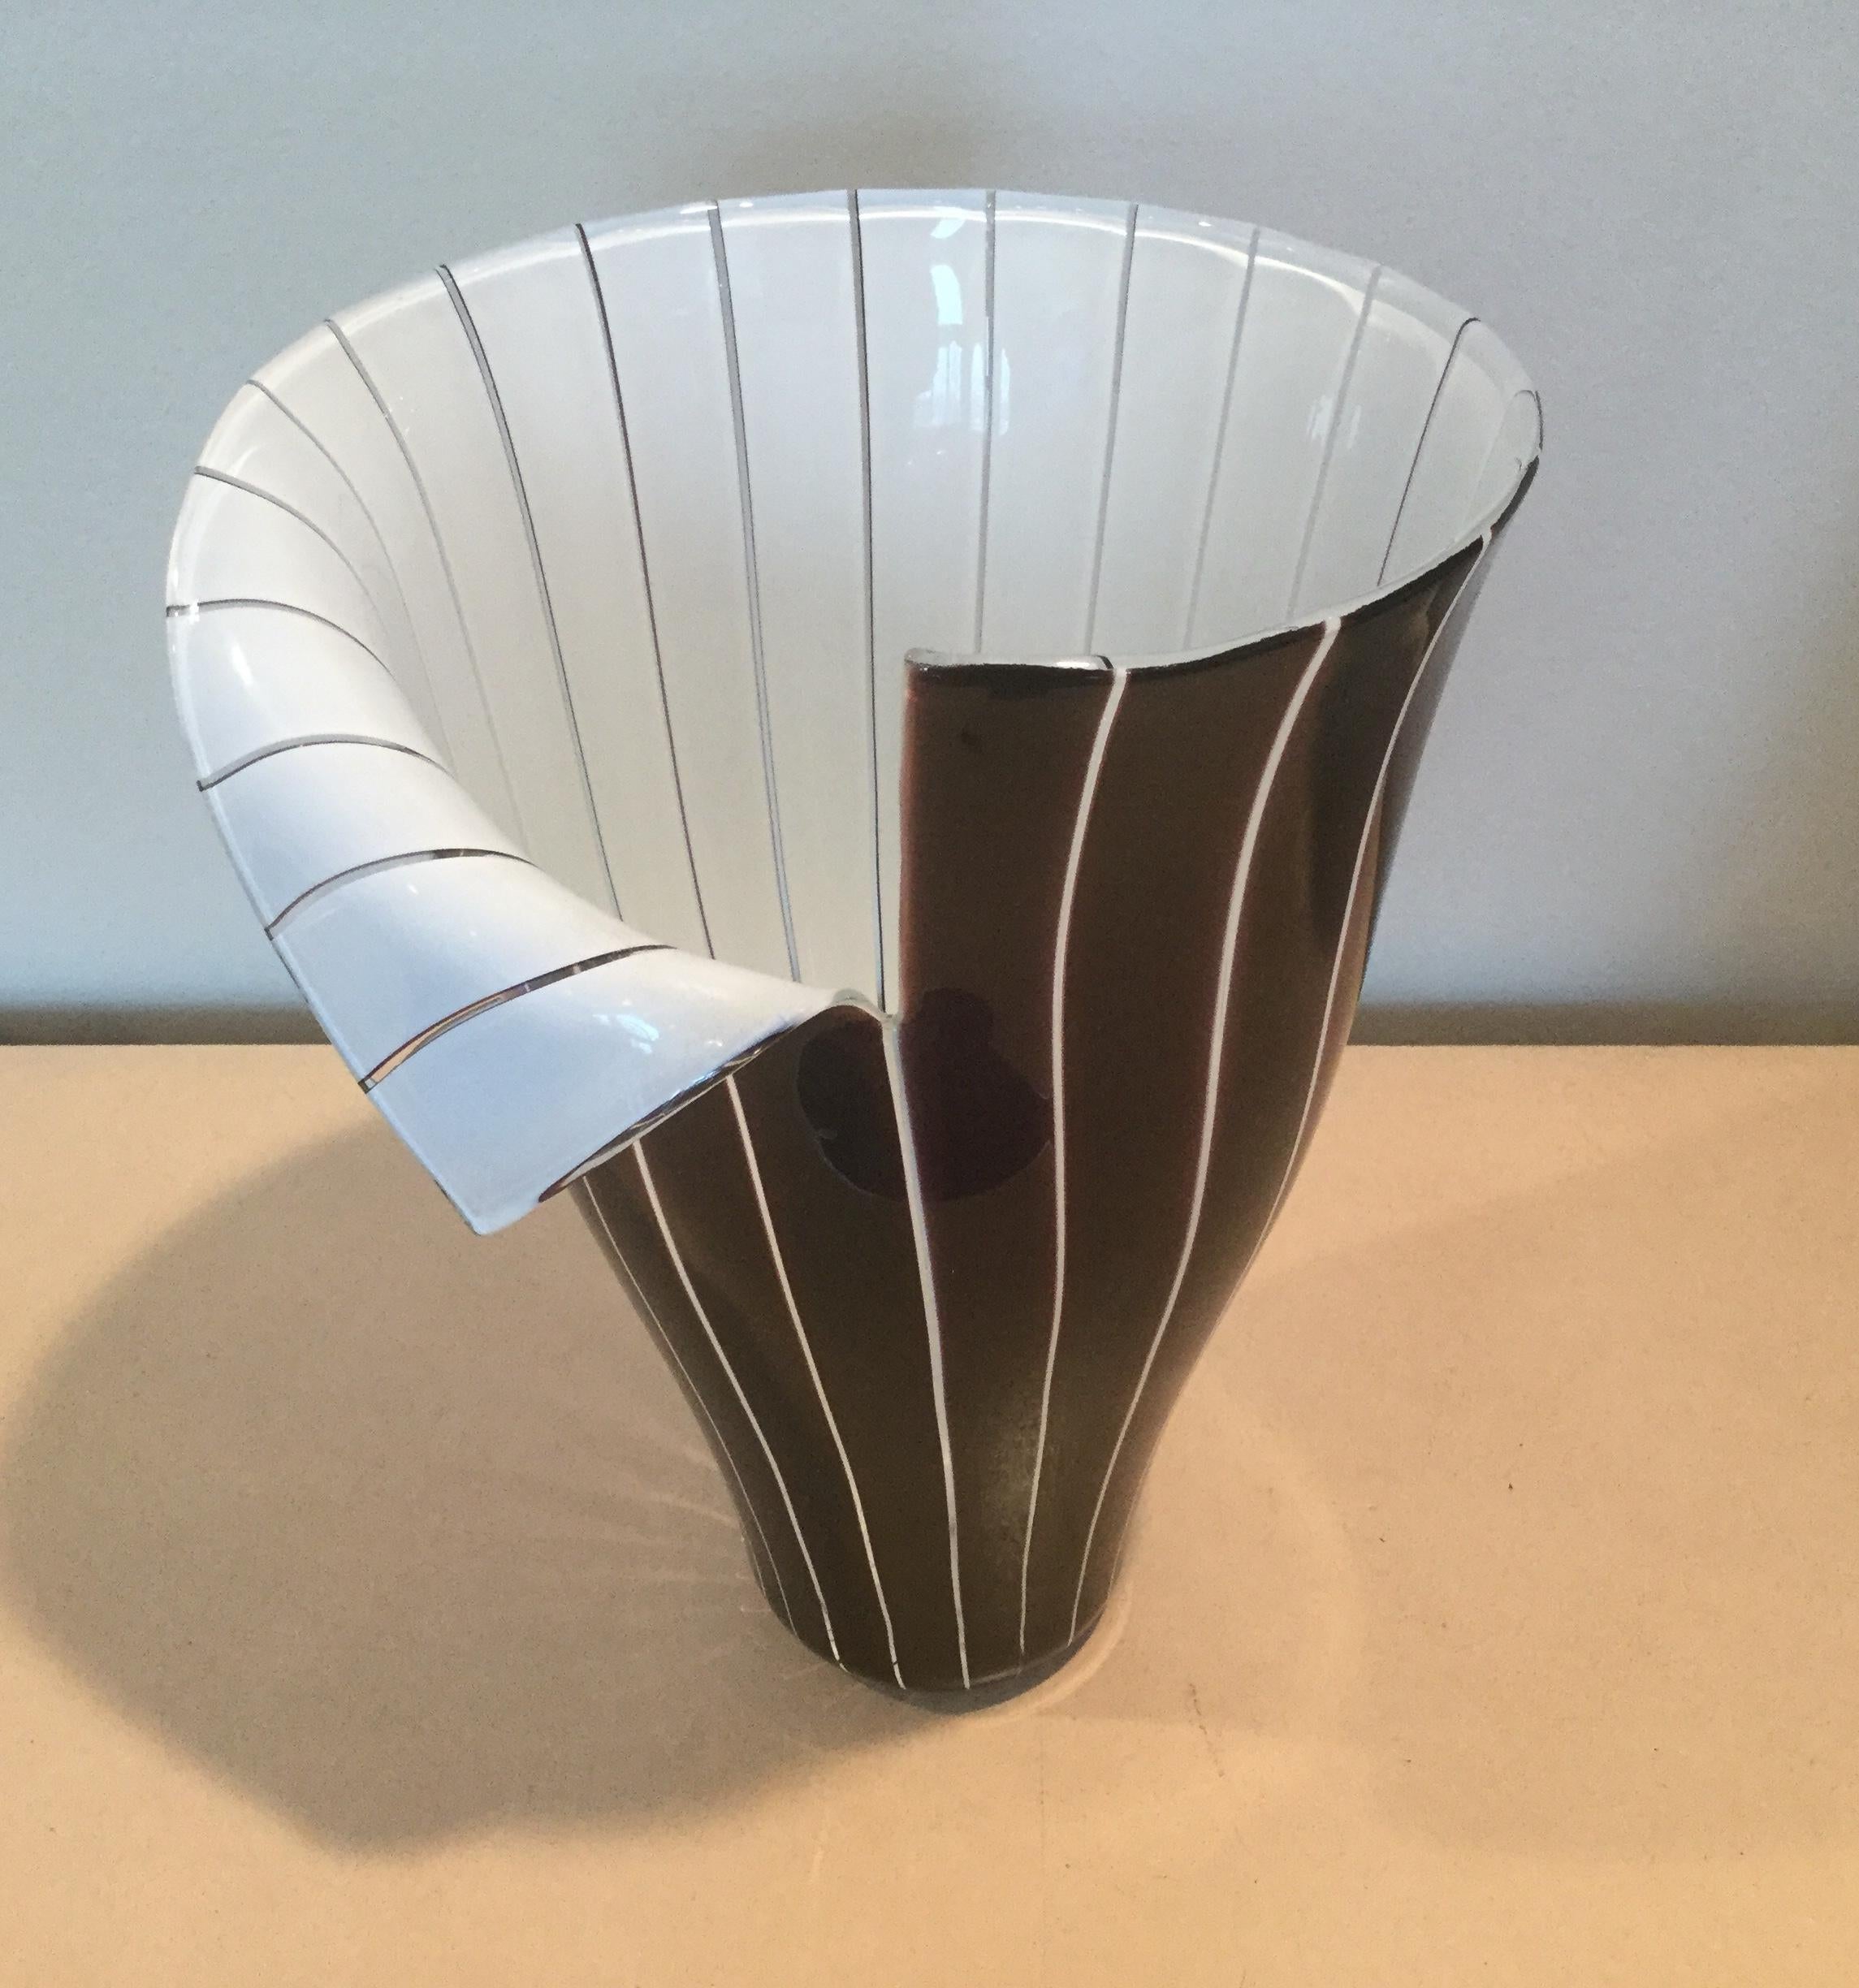 Wonderful display vase by Toni Zuccheri for Barovier and Toso. Vase is signed and dated on the bottom.